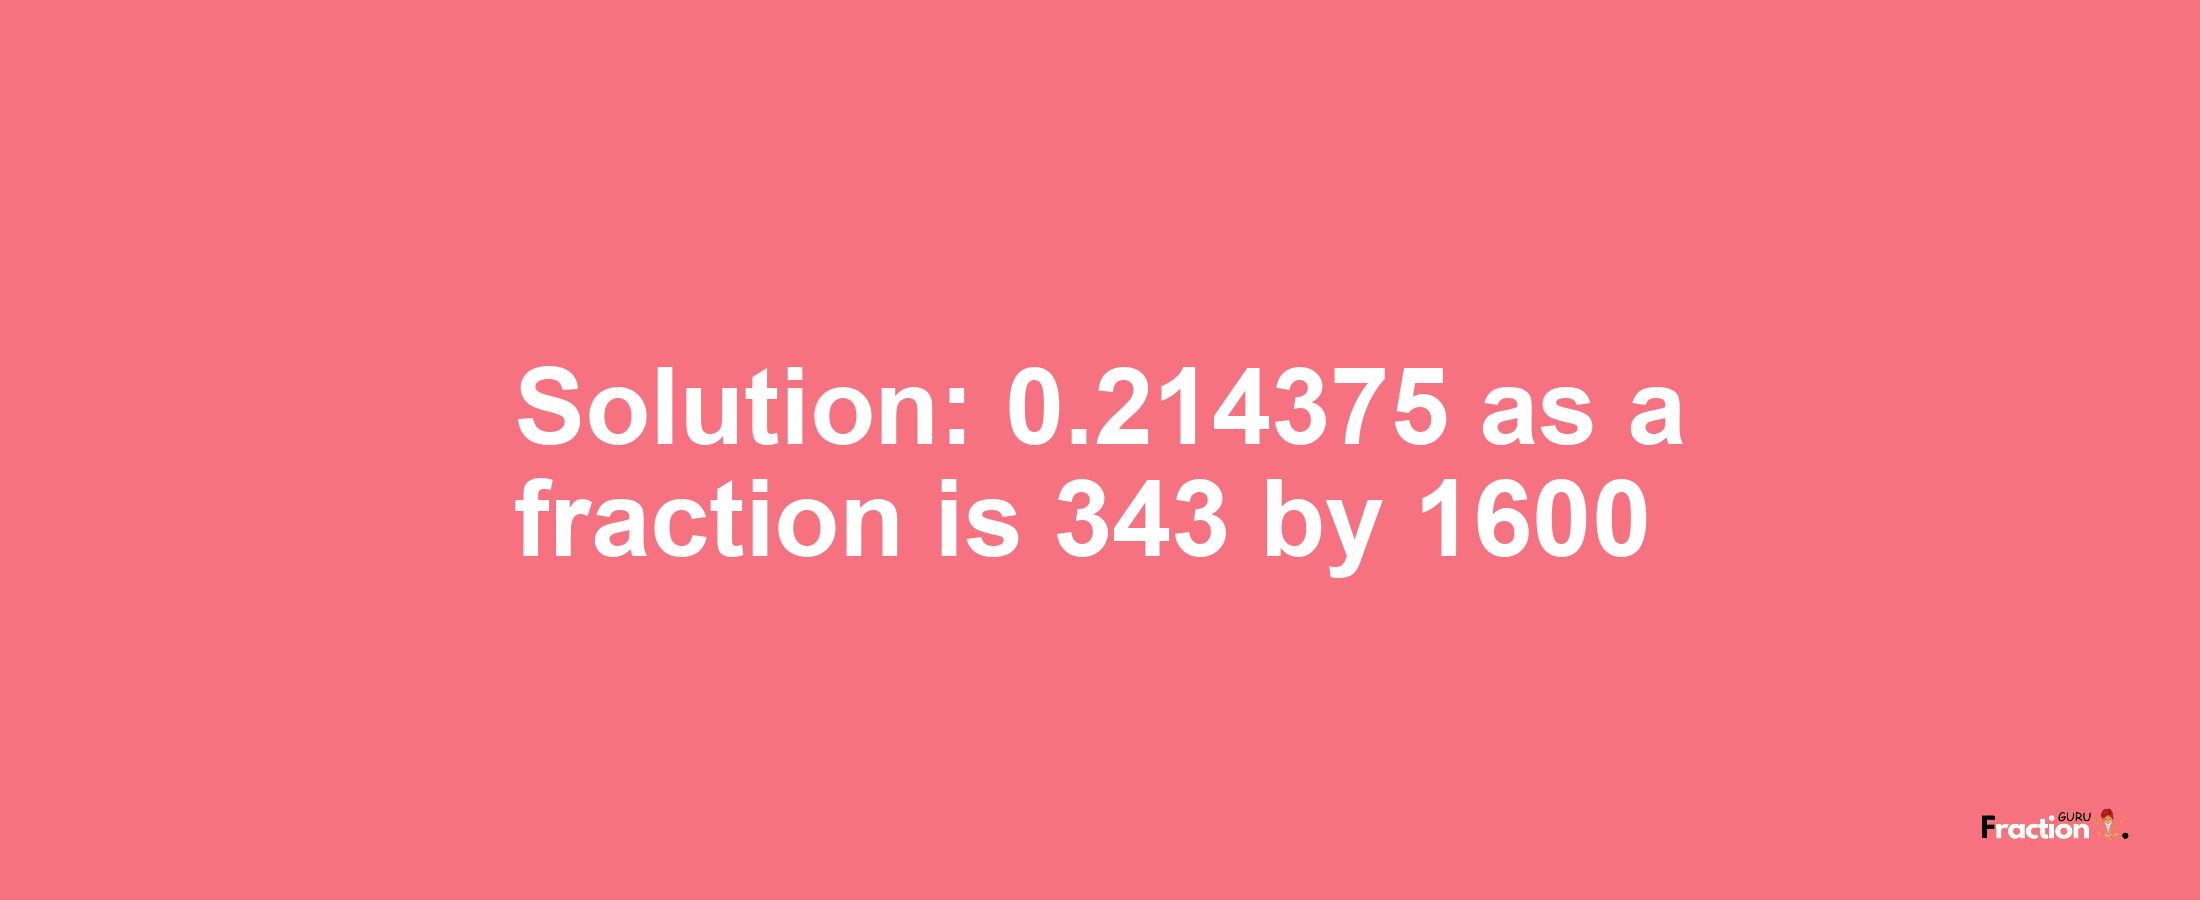 Solution:0.214375 as a fraction is 343/1600